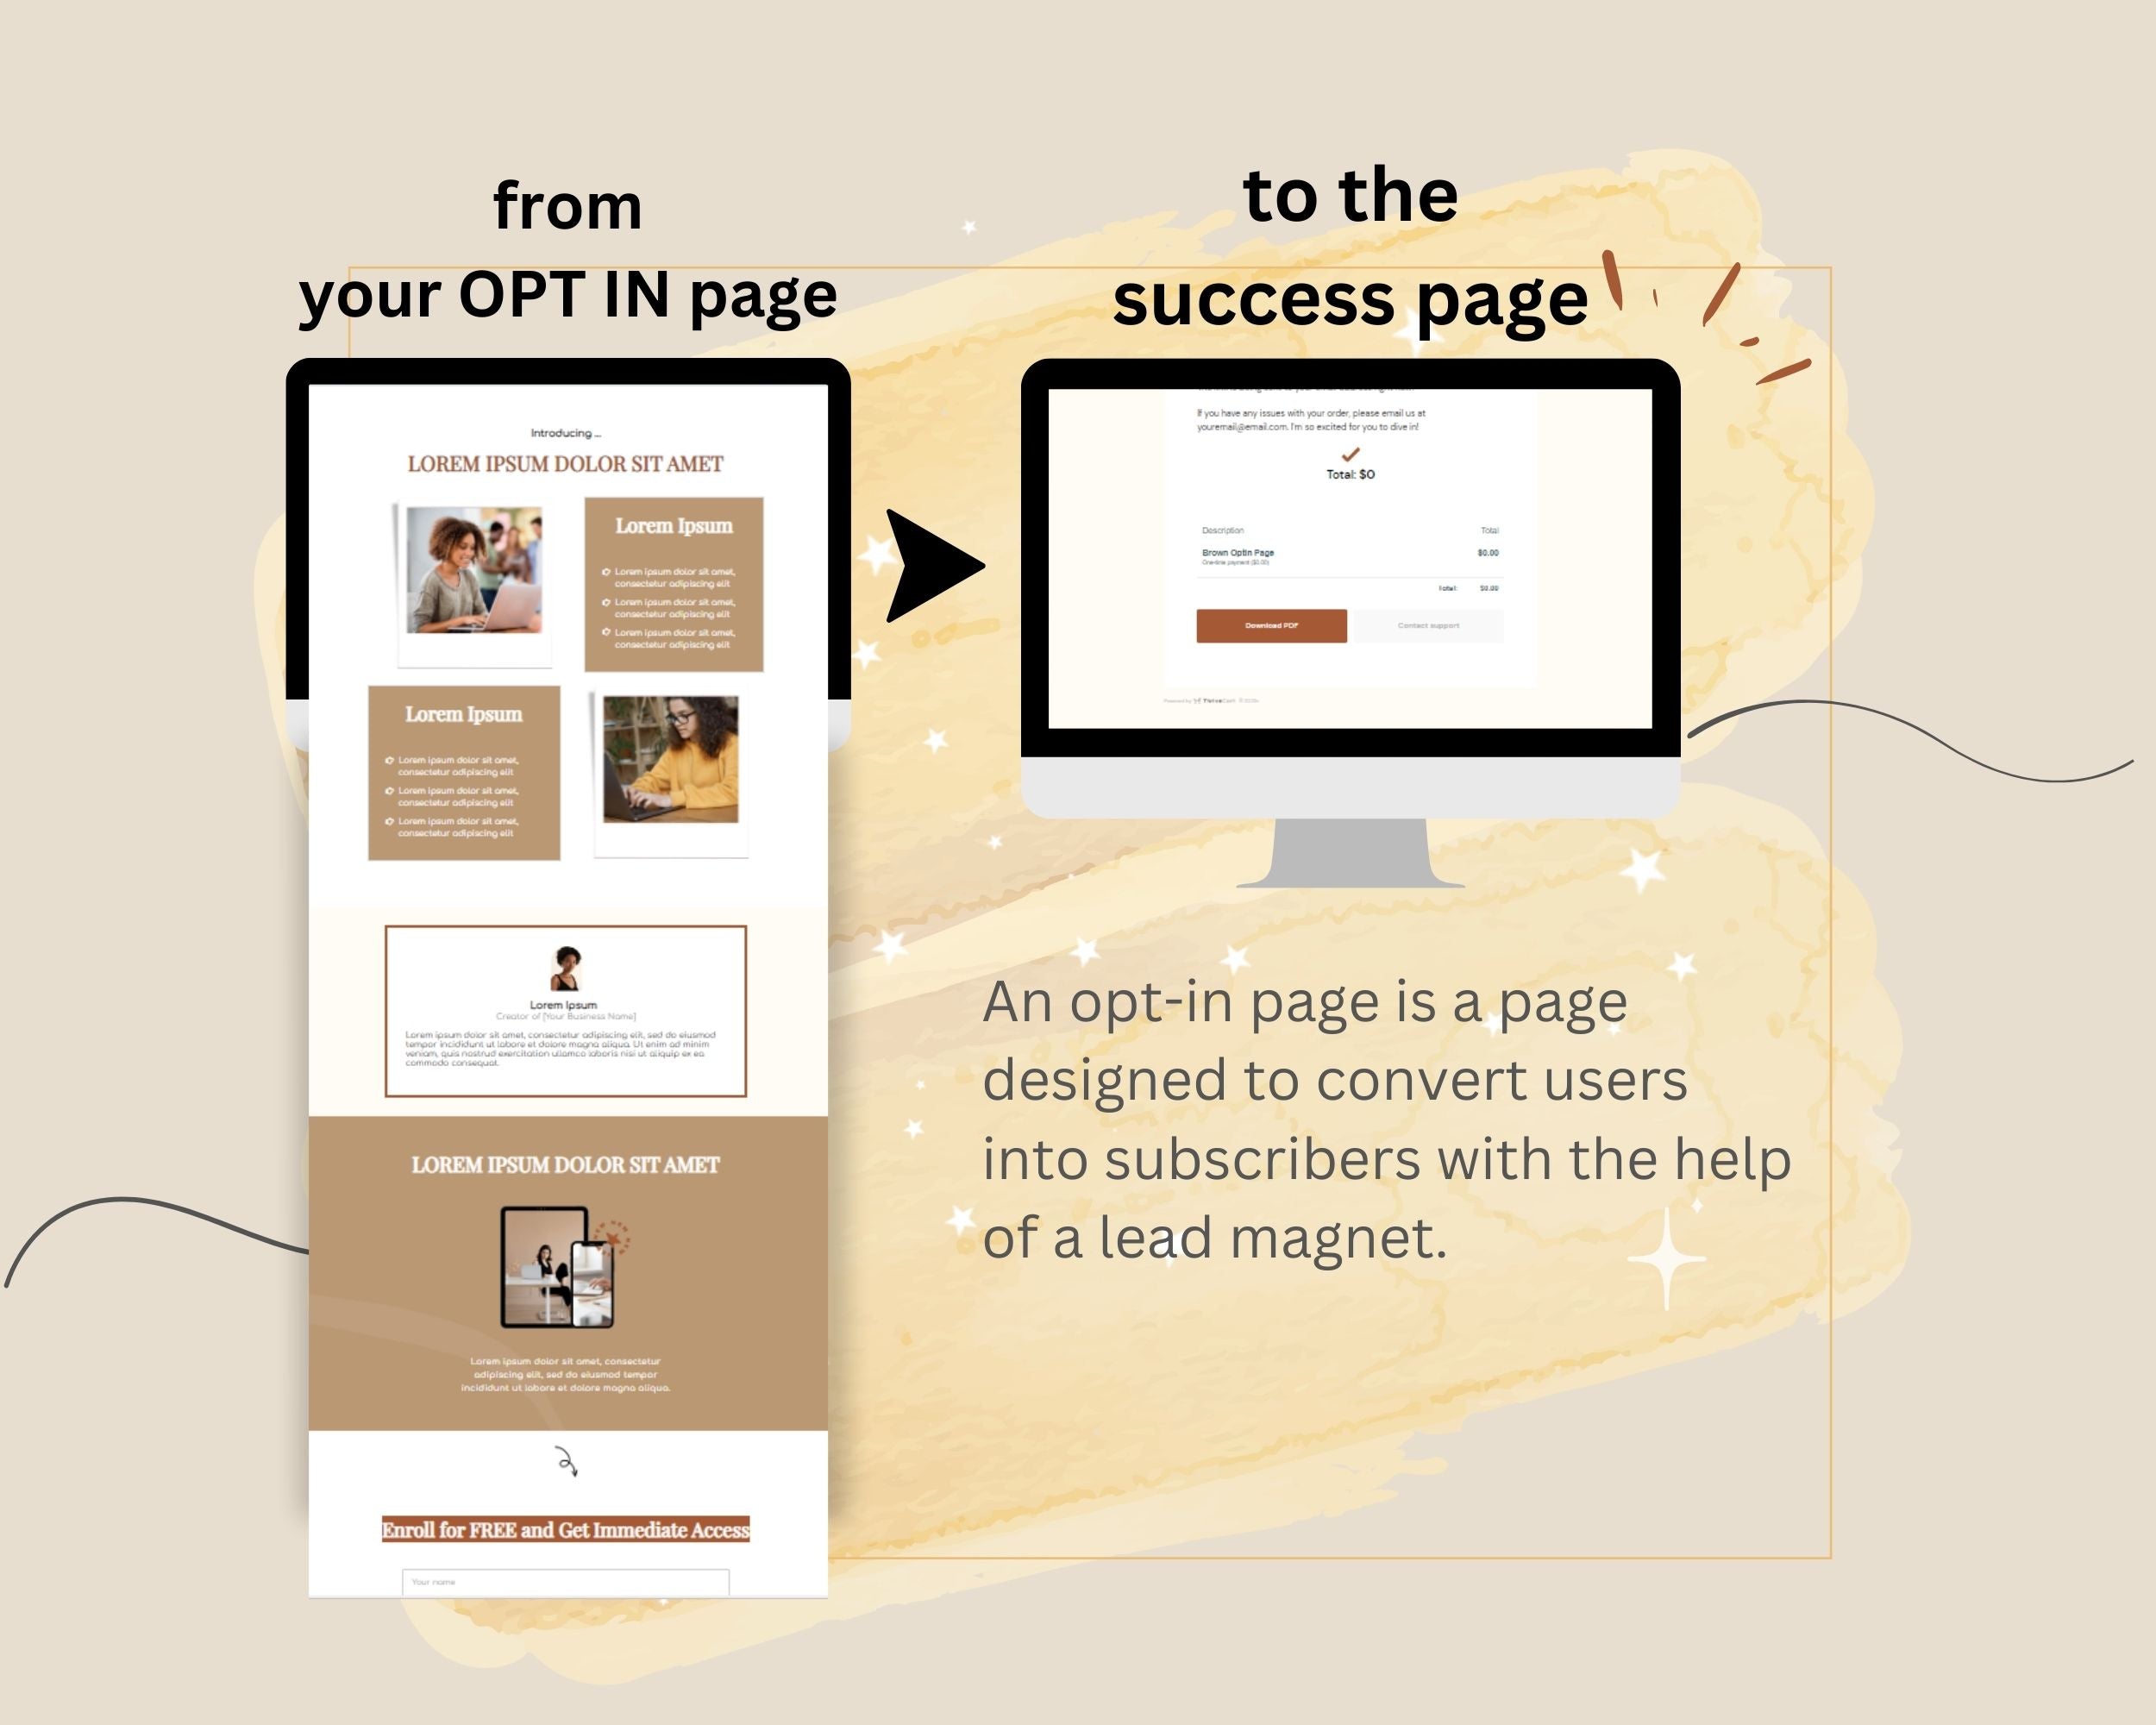 Brown ThriveCart Opt-In Page Template